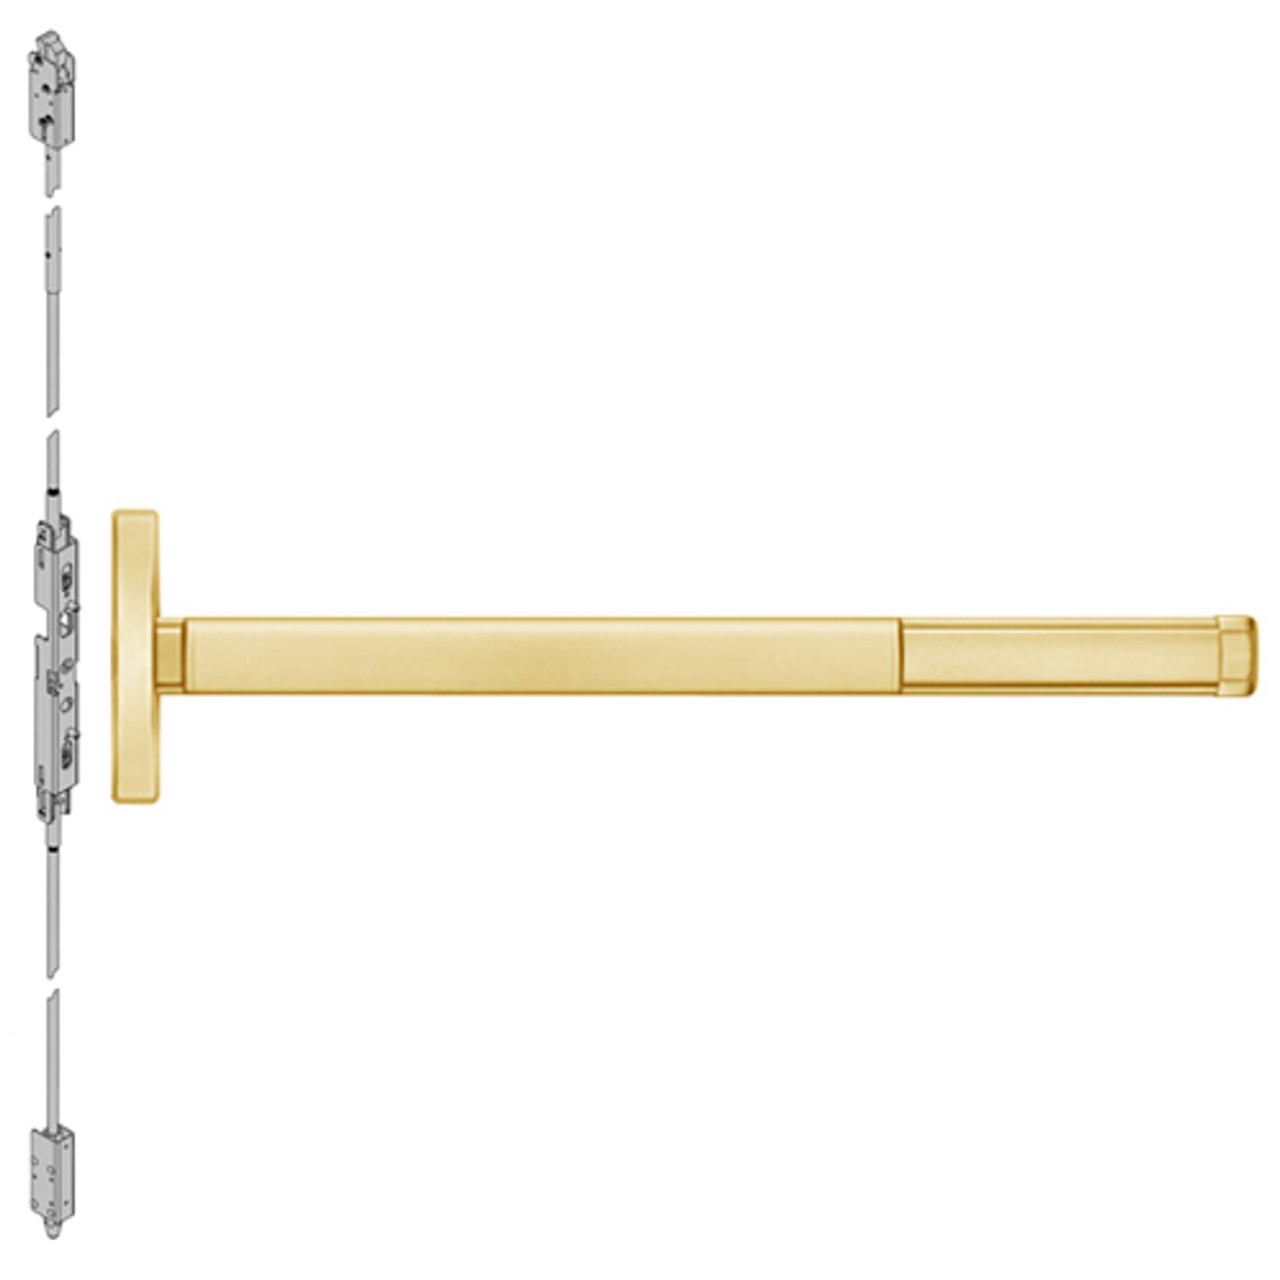 DEFL2603-605-48 PHI 2600 Series Fire Rated Concealed Vertical Rod Exit Device with Delayed Egress Prepped for Key Retracts Latchbolt in Bright Brass Finish